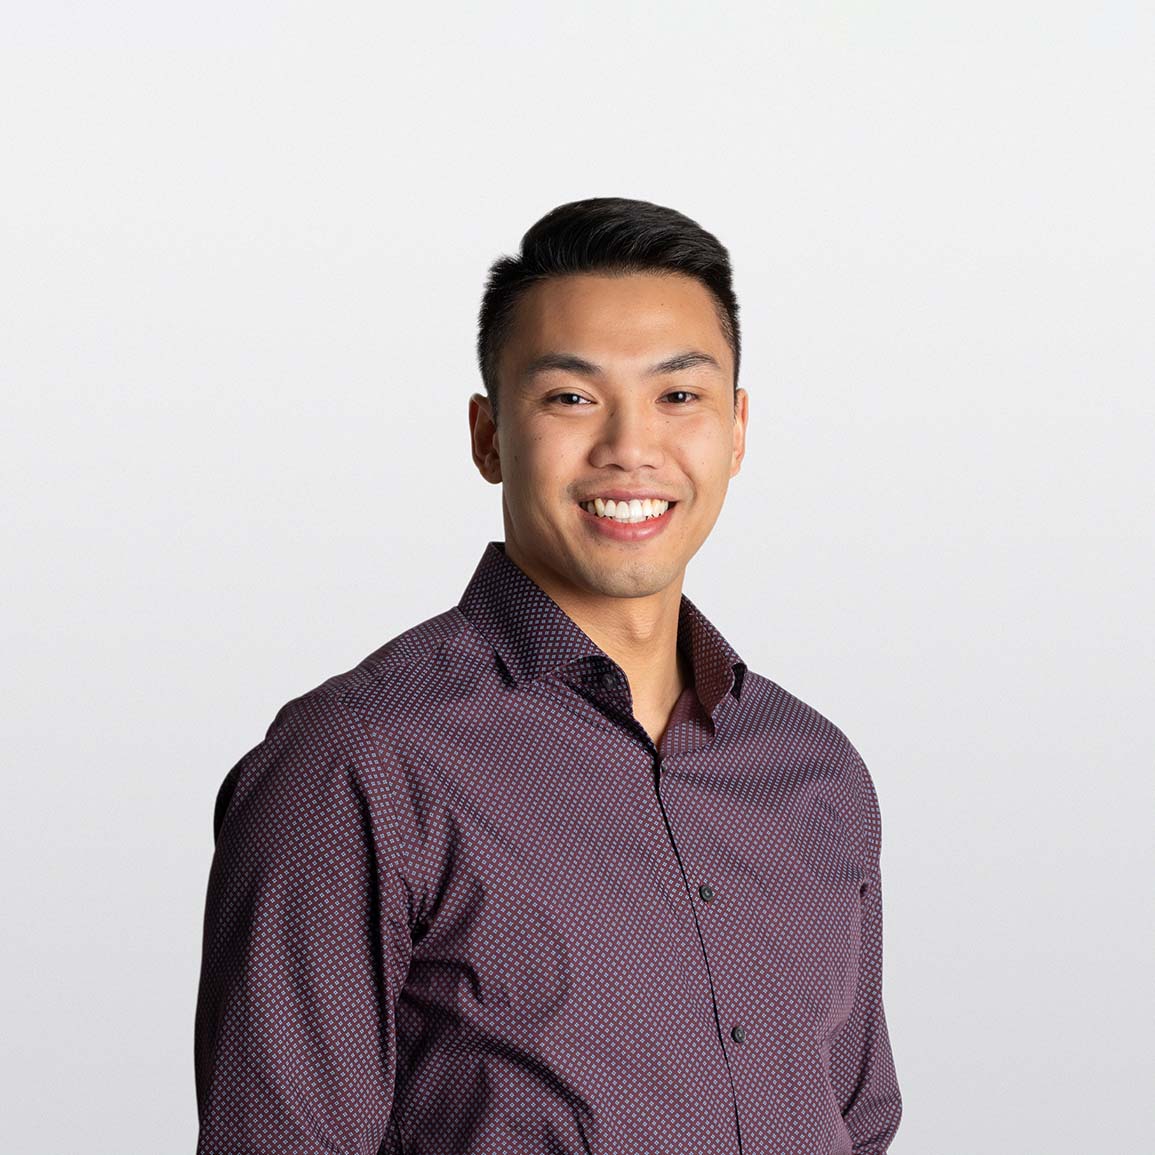 Image of Henry Bui Private Banking Advisor on white background